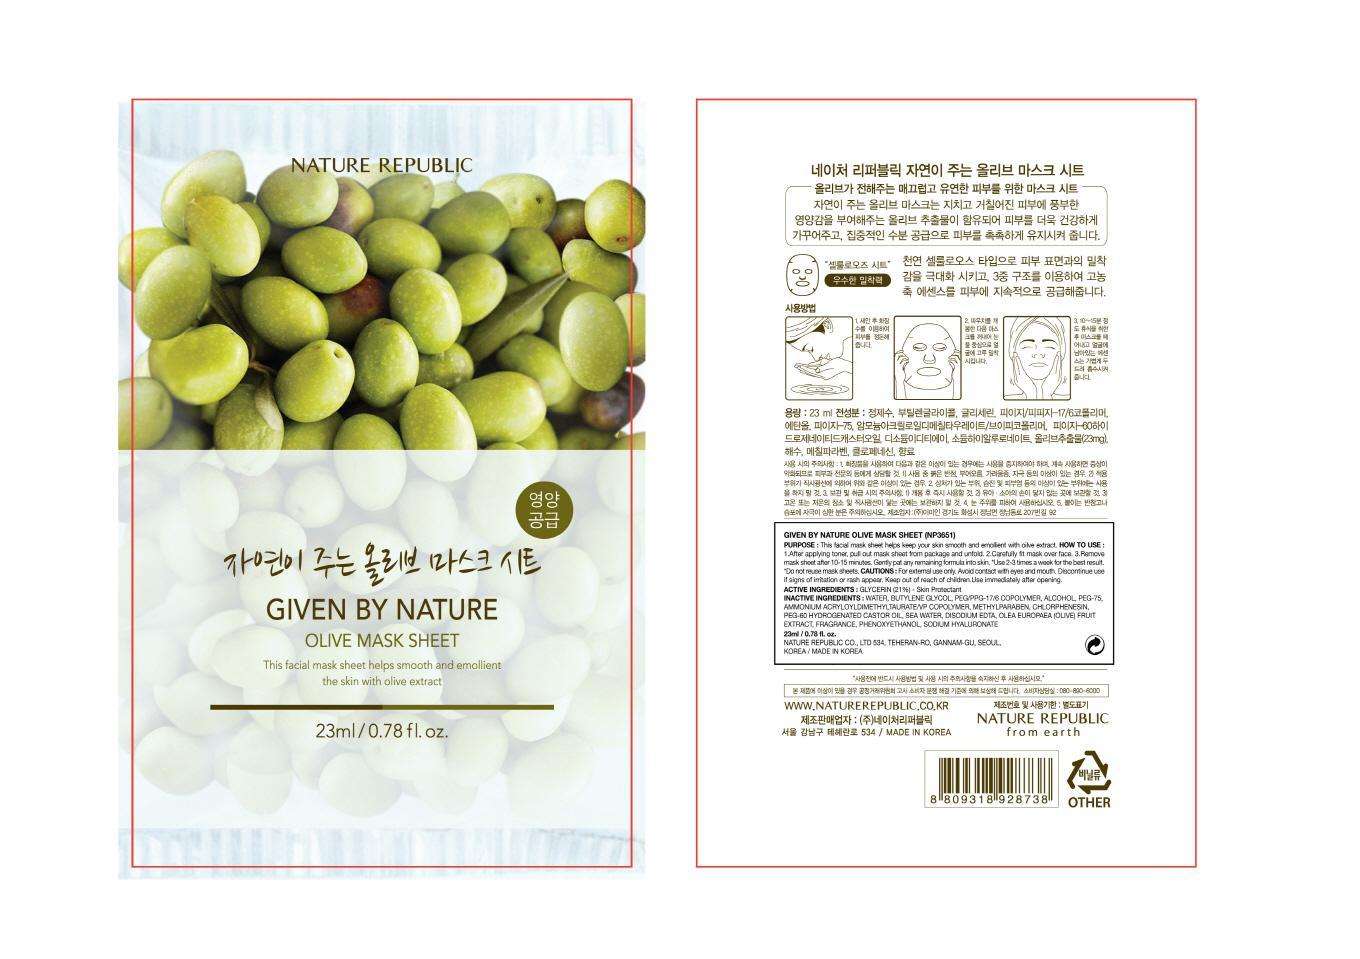 GIVEN BY NATURE OLIVE MASK SHEET